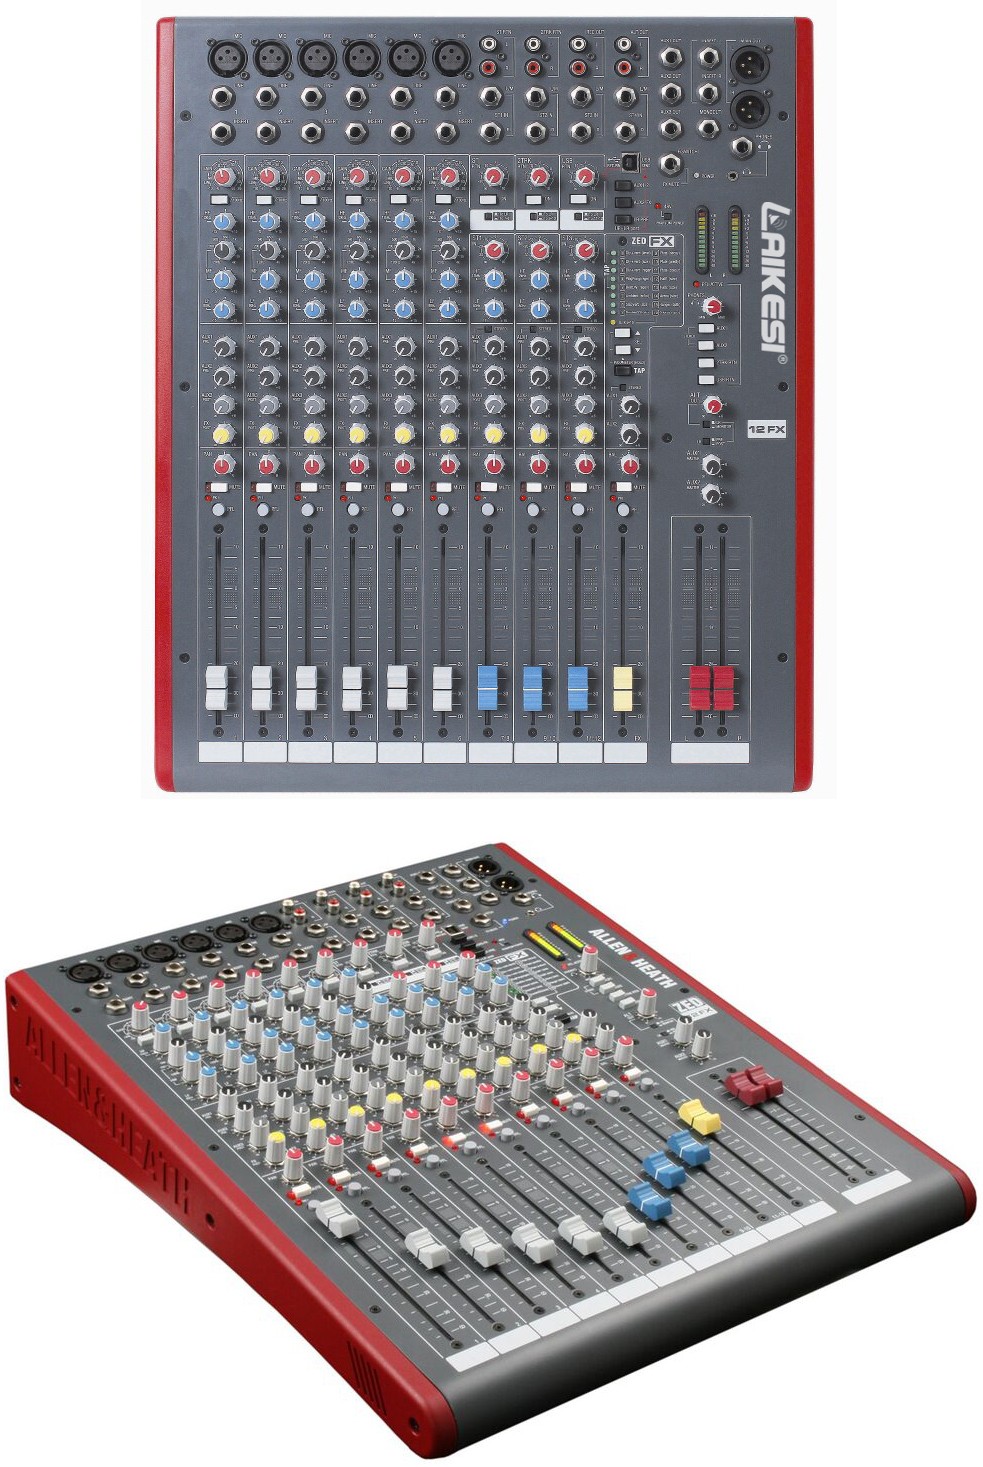 audio mixer software for pc